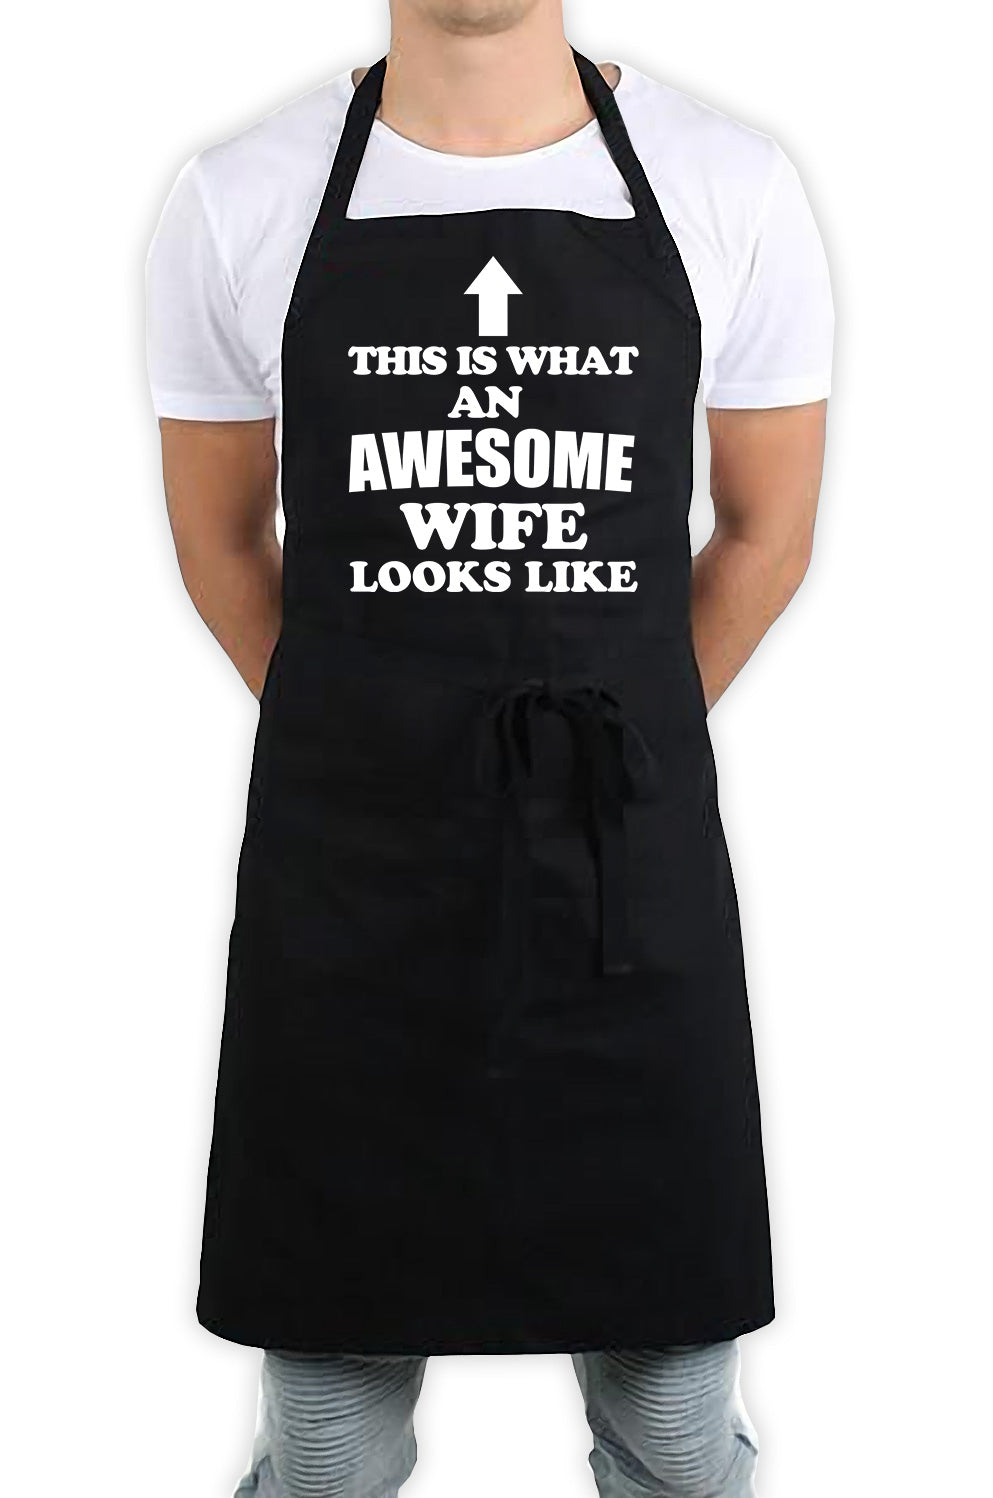 This Is What An Awesome Wife Looks Like Funny Kitchen BBQ Apron Black